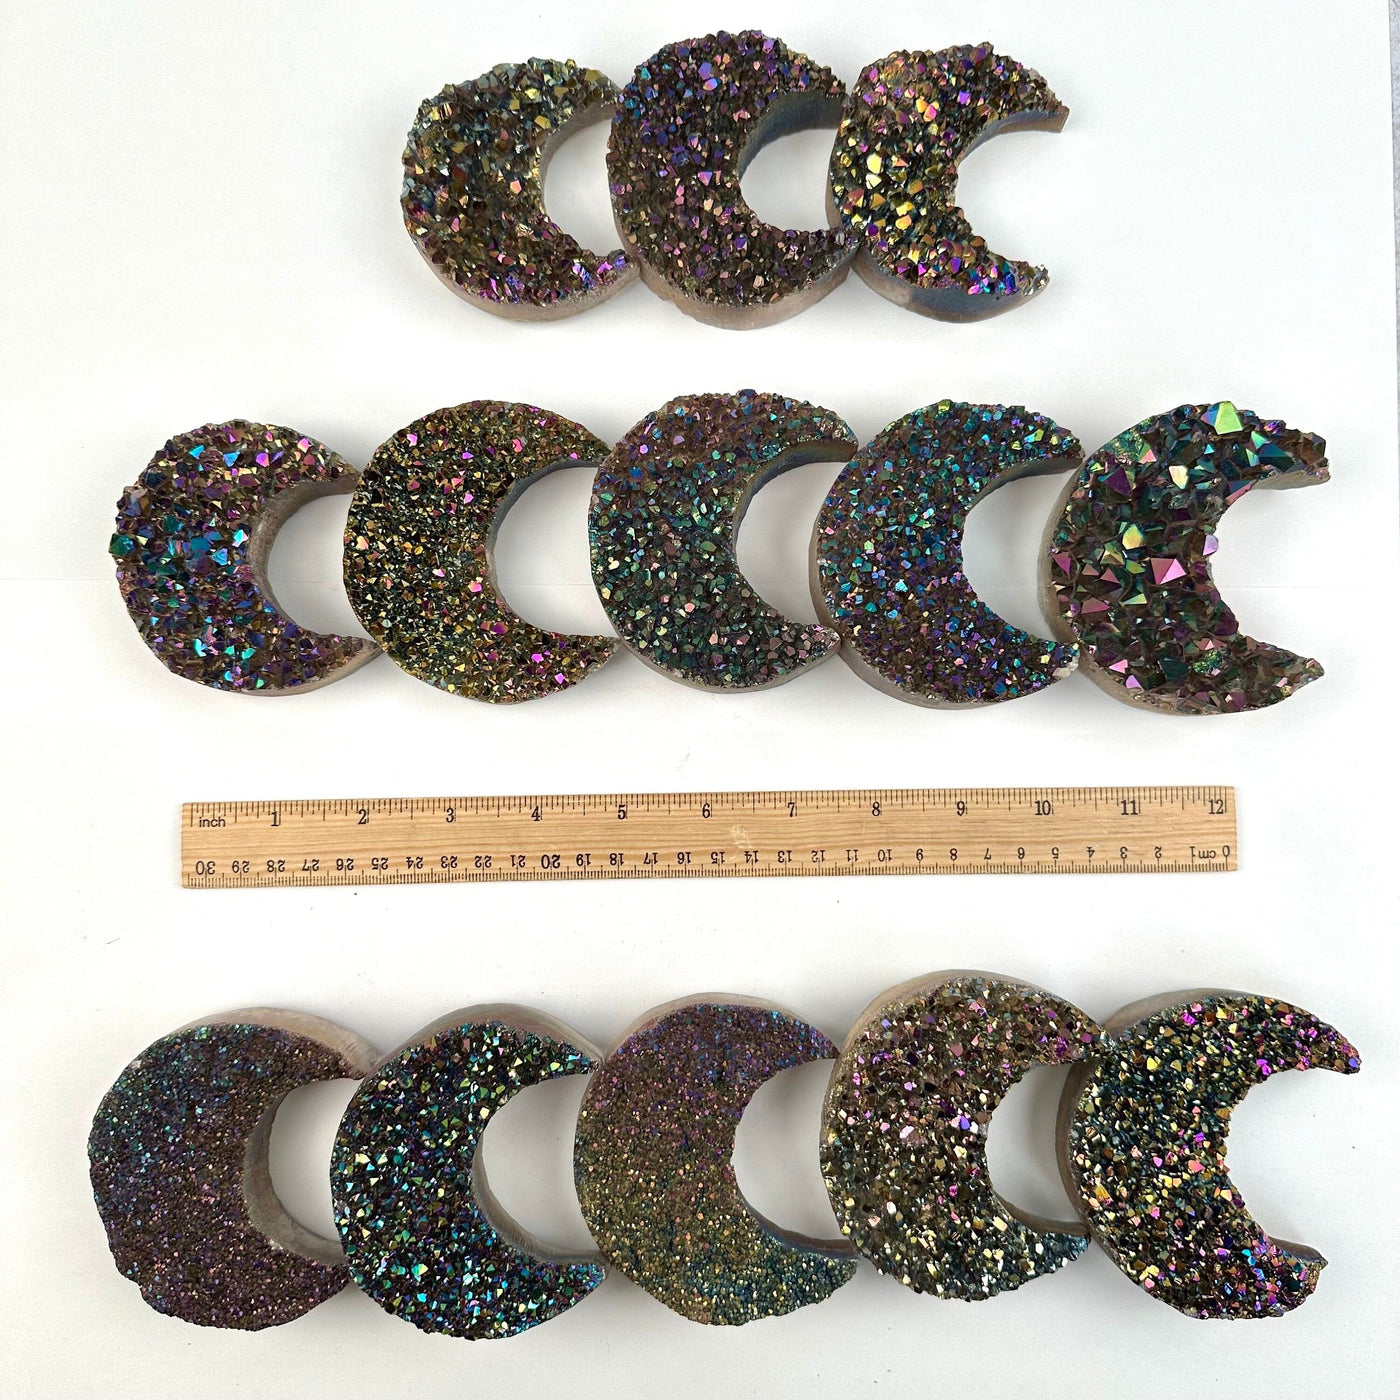 Titanium Druzy Crystal Crescent Moon - YOU CHOOSE all variants with ruler for size reference